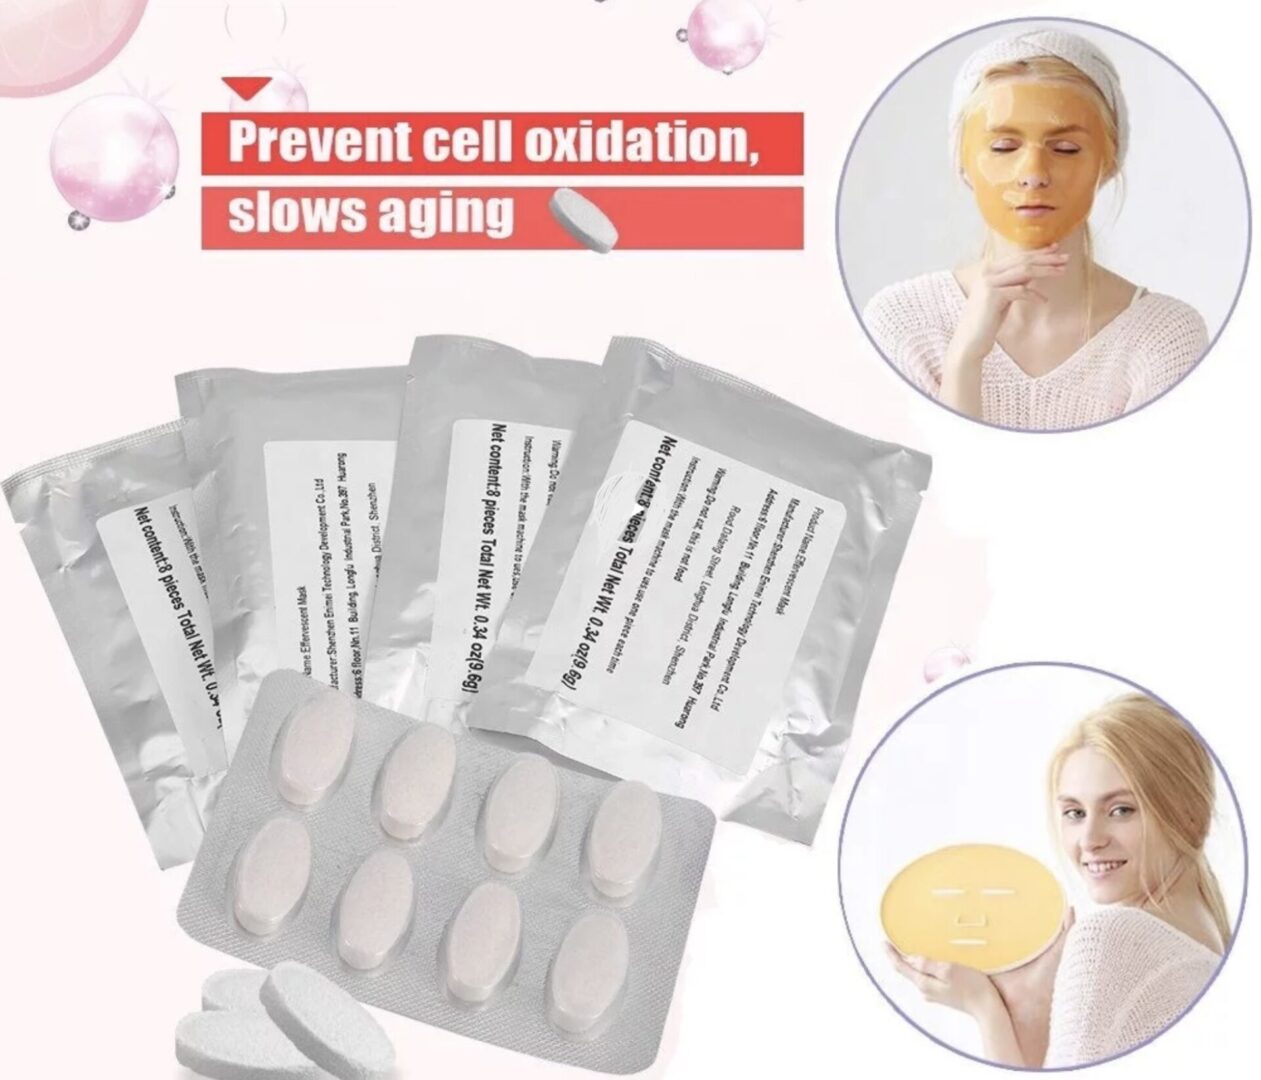 A package of collagen patches is shown.